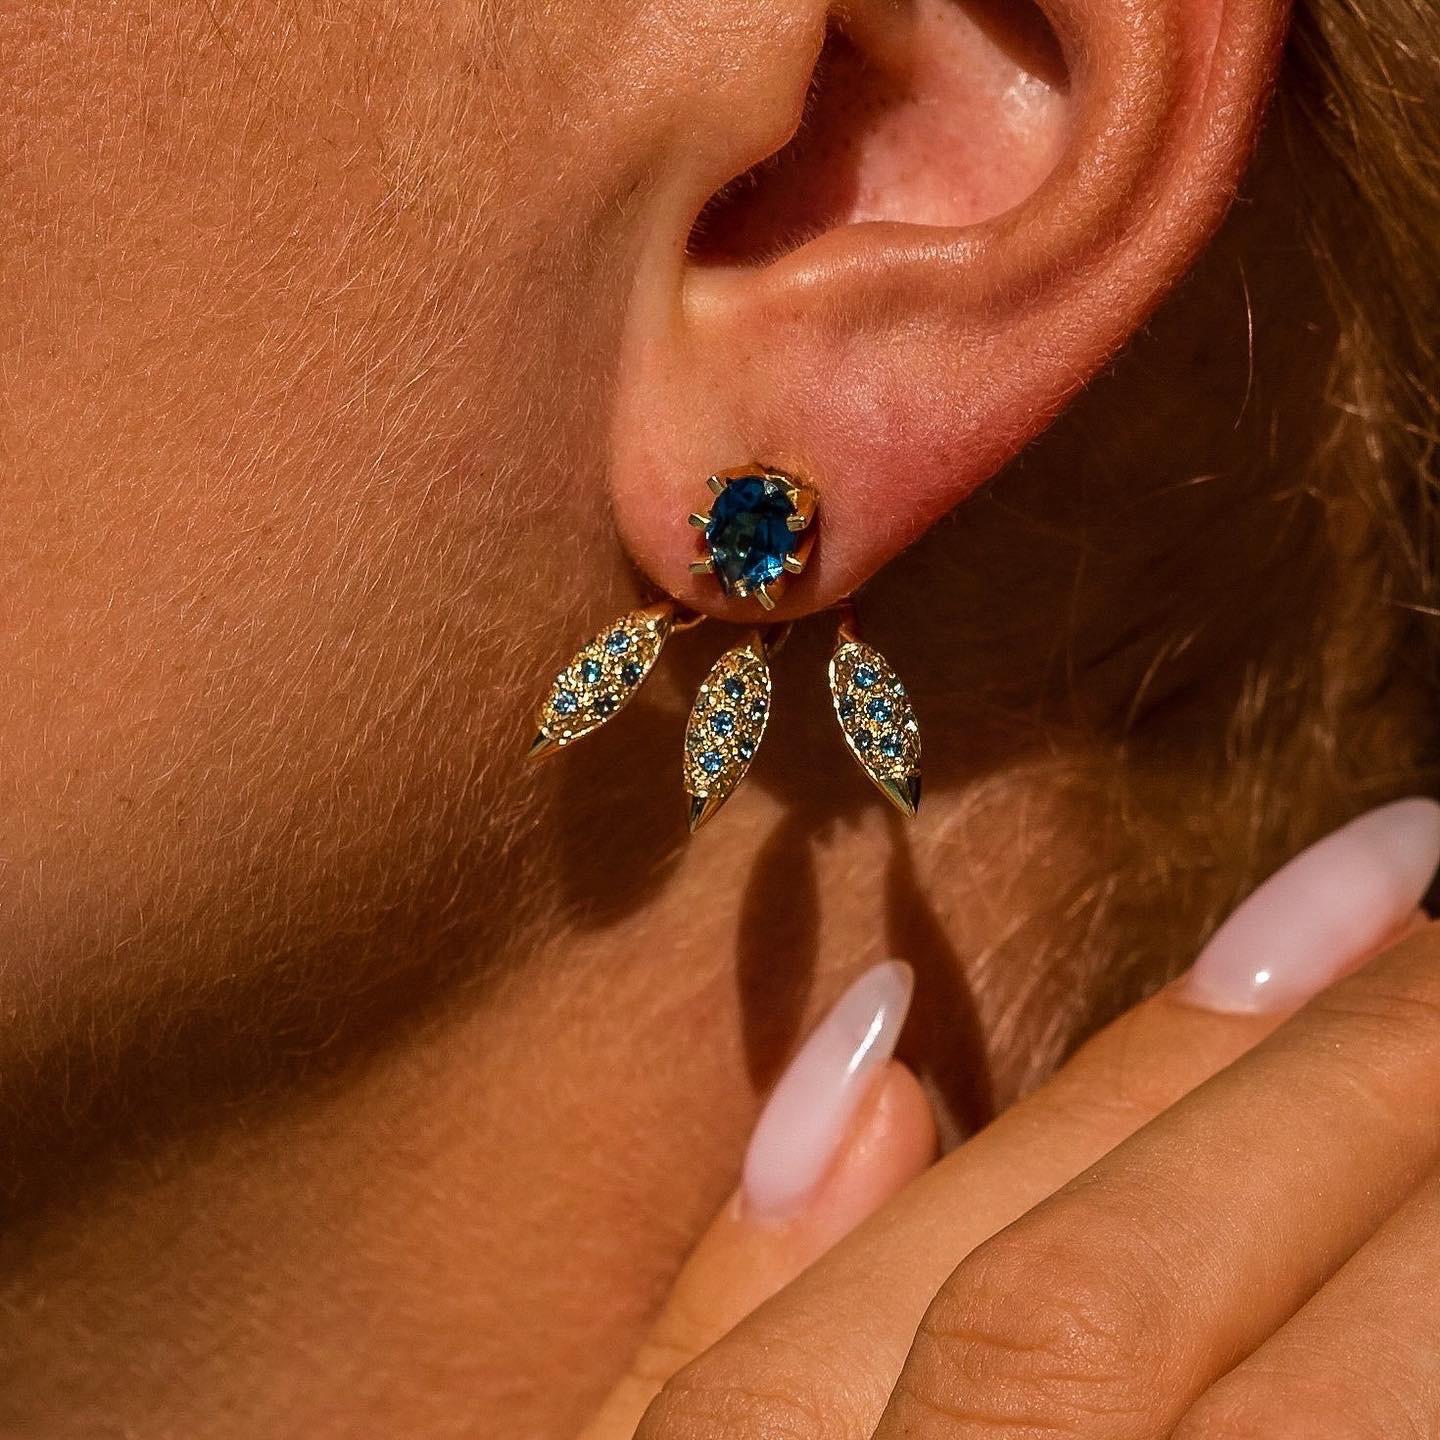 The ‘Grain’, ear jackets are crafted in 18K gold hallmarked in Cyprus. These impressive three part sculptural earrings come in a highly polished finish and feature 1,43 Cts of London blue Topazes The studs featuring a pair of pear shaped Topazes